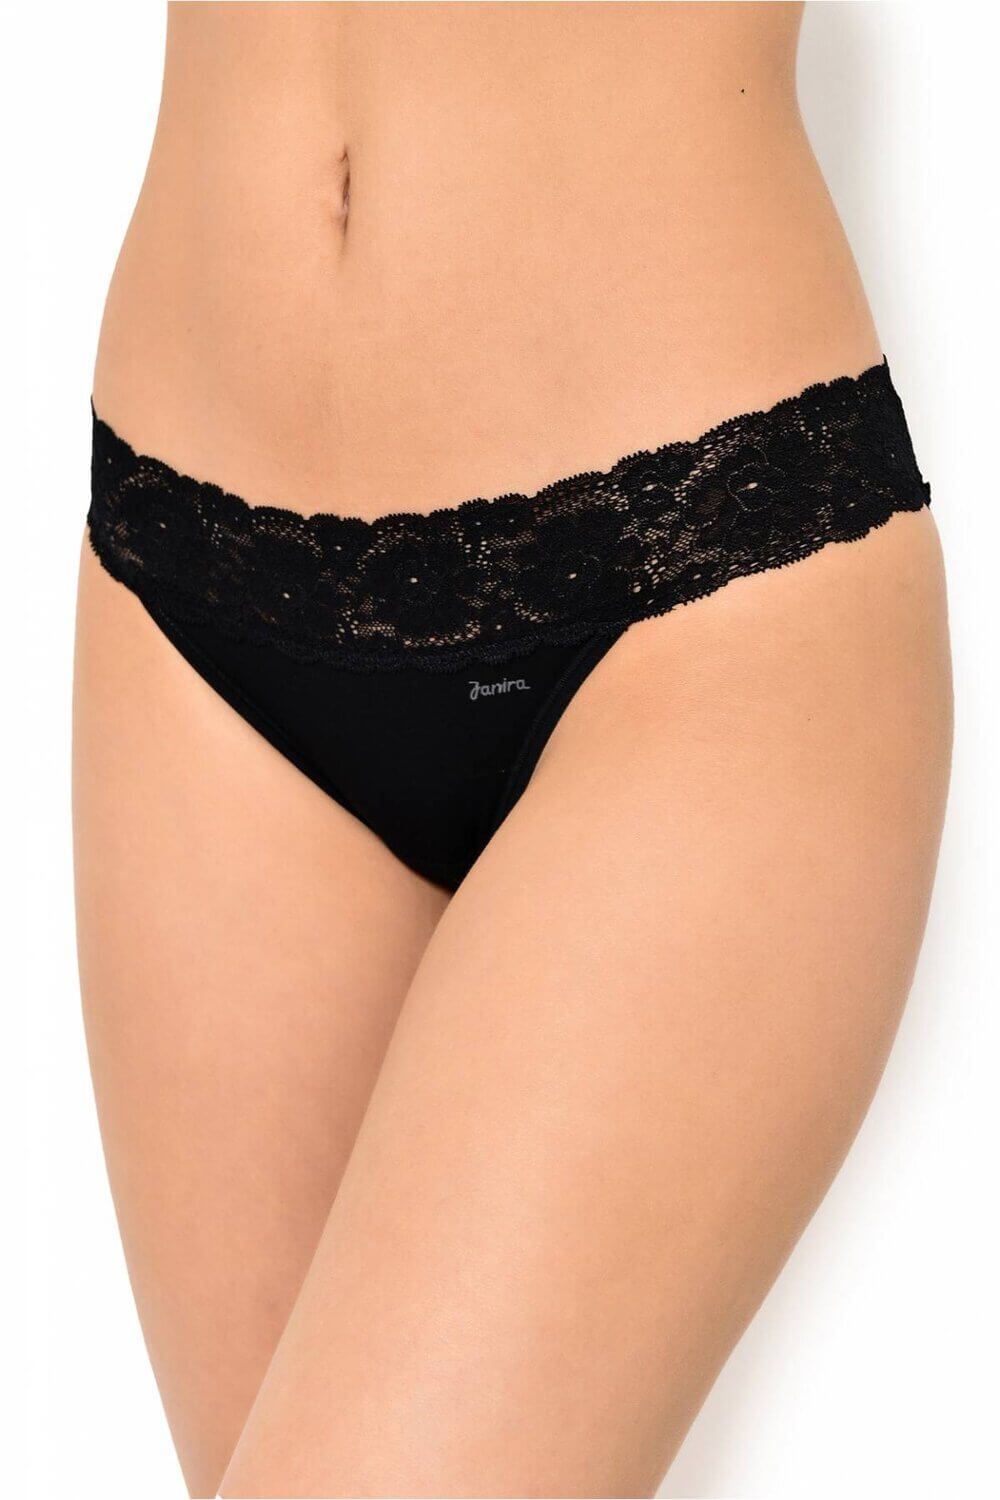 CULOTTE TAILLE BASSE-DOLCE CINTURE